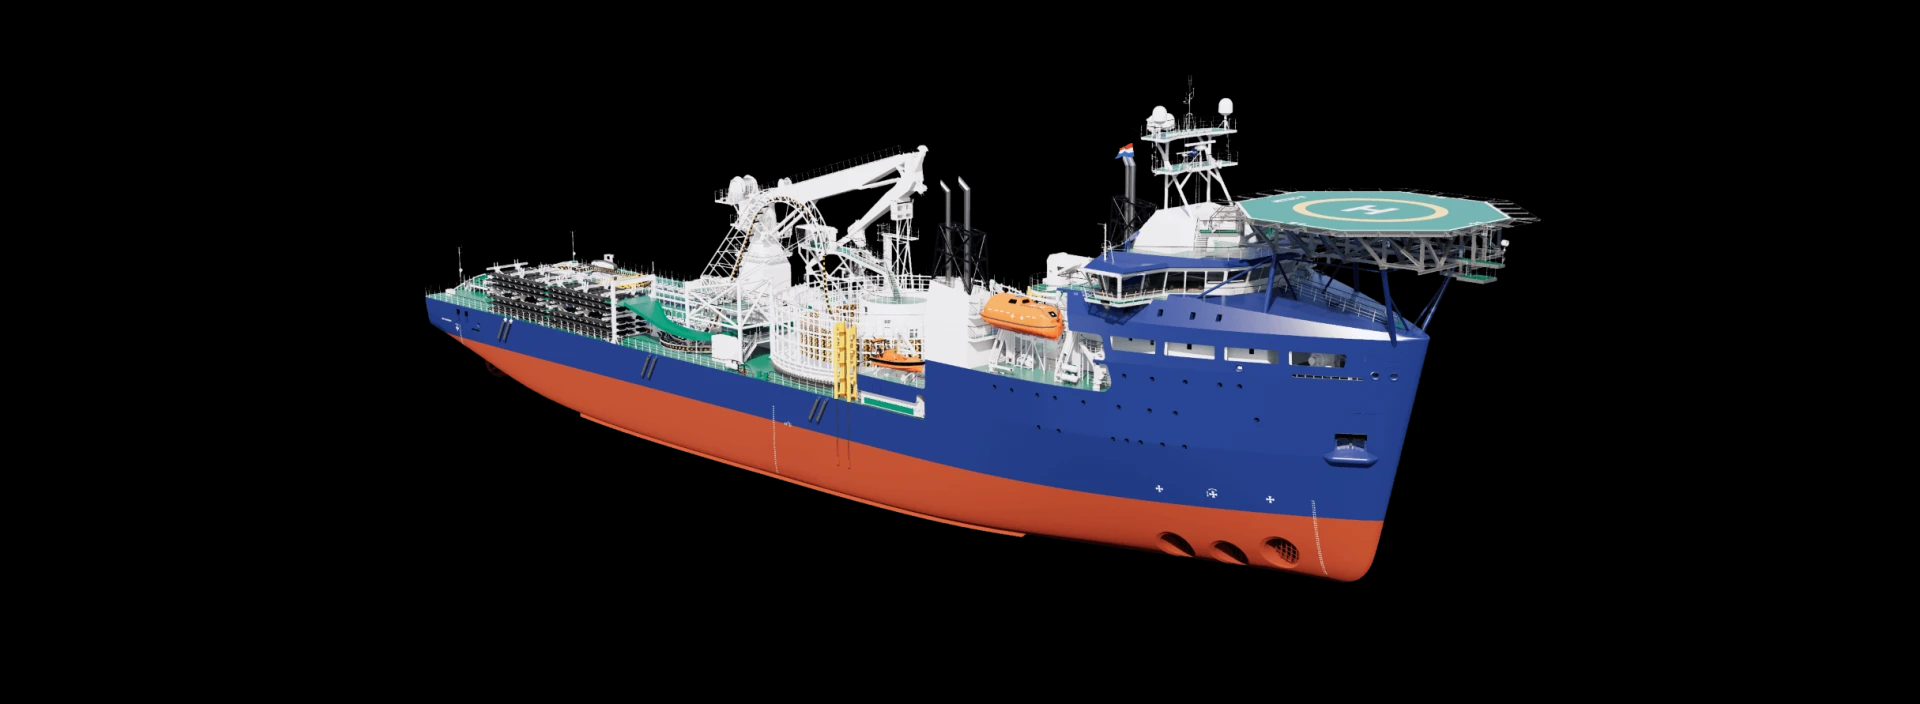 DAMEN, Damen's Offshore Wind; Laying plans. Looking ahead to the cable laying ve...